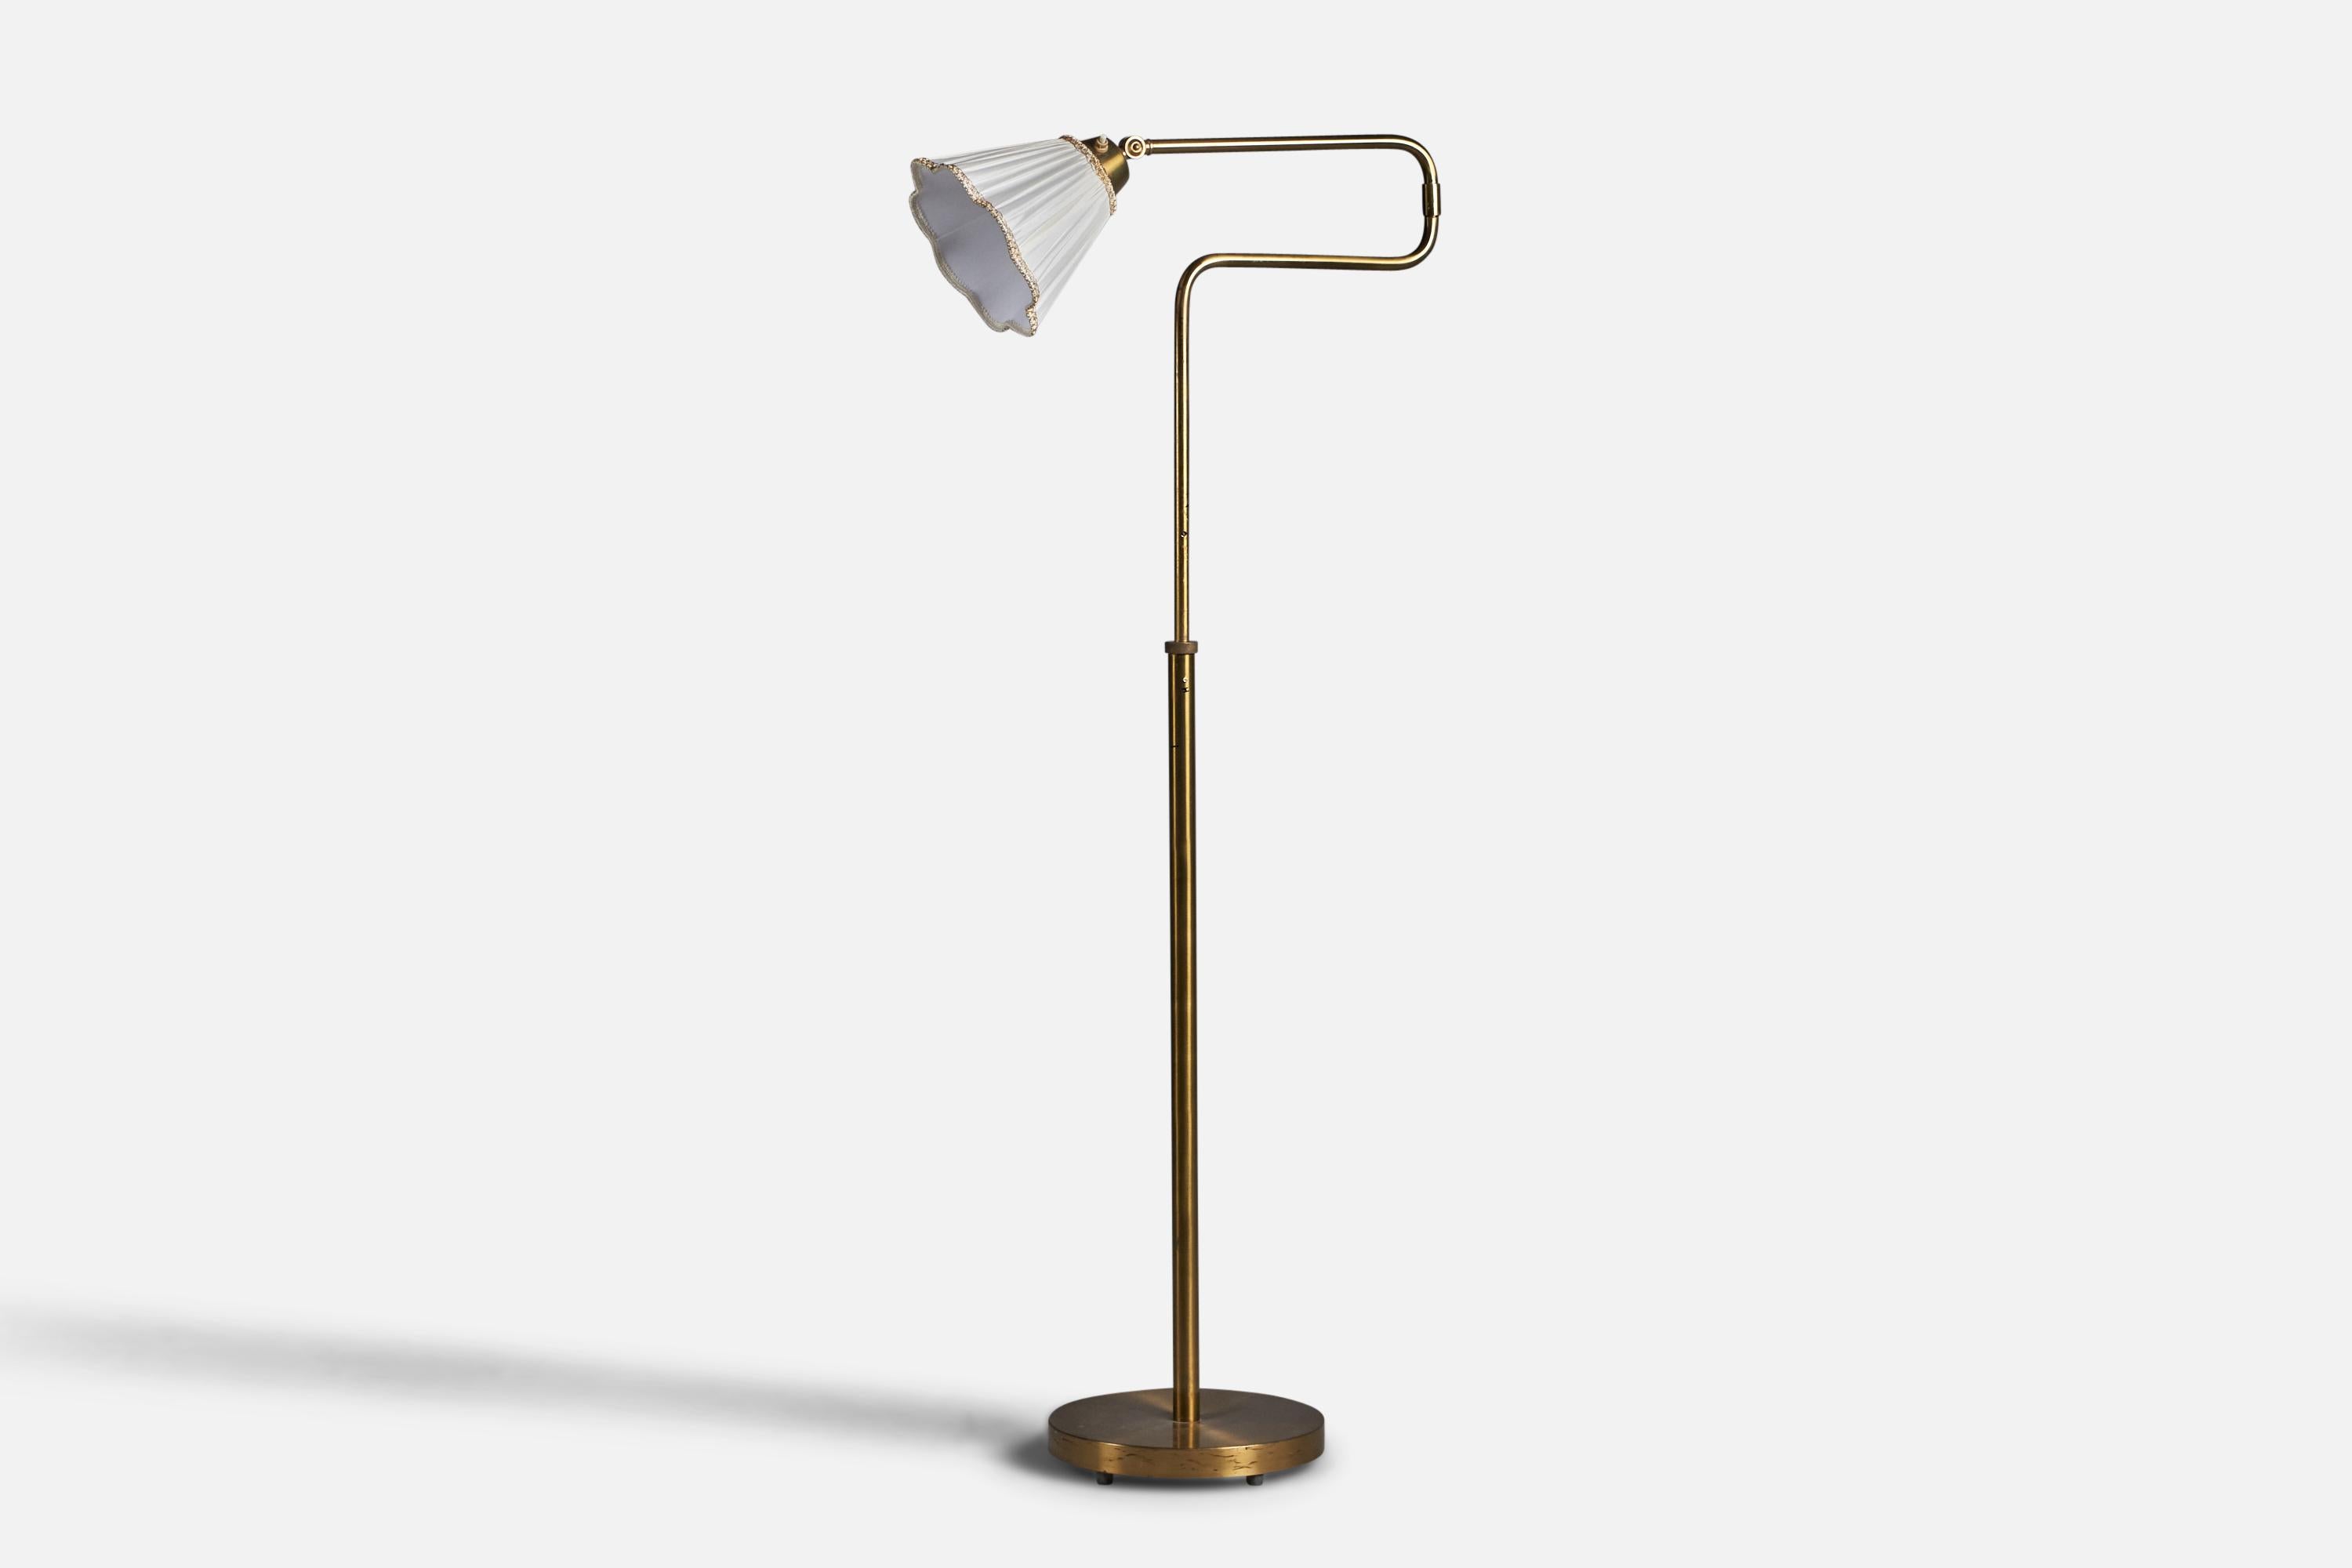 An adjustable brass and fabric floor lamp designed and produced by Nordiska Kompaniet, Sweden, 1940s.

Overall Dimensions (inches): 55.25” H x 11.5” W x 23.5” D
Dimensions variable. Adjustability of height fixed in to two positions, inquire for more